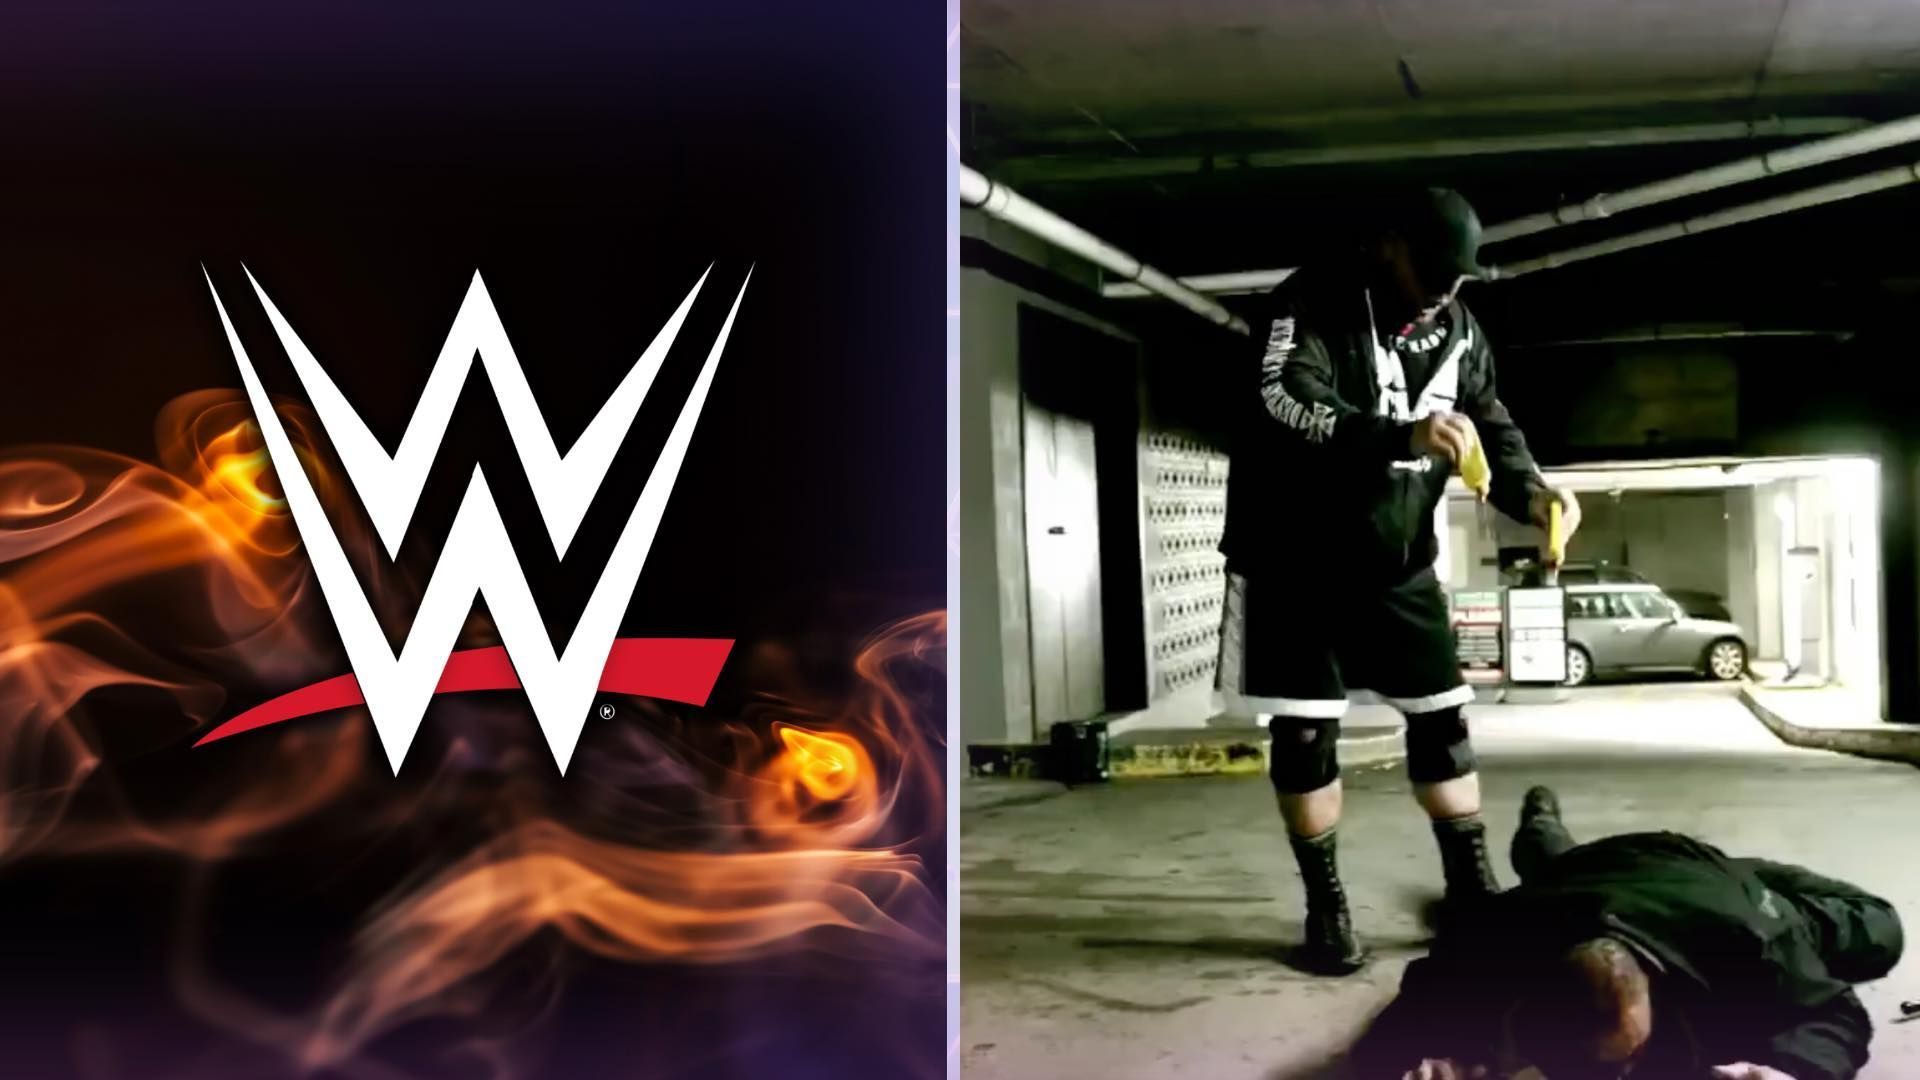 A superstar outside of WWE was set on fire.